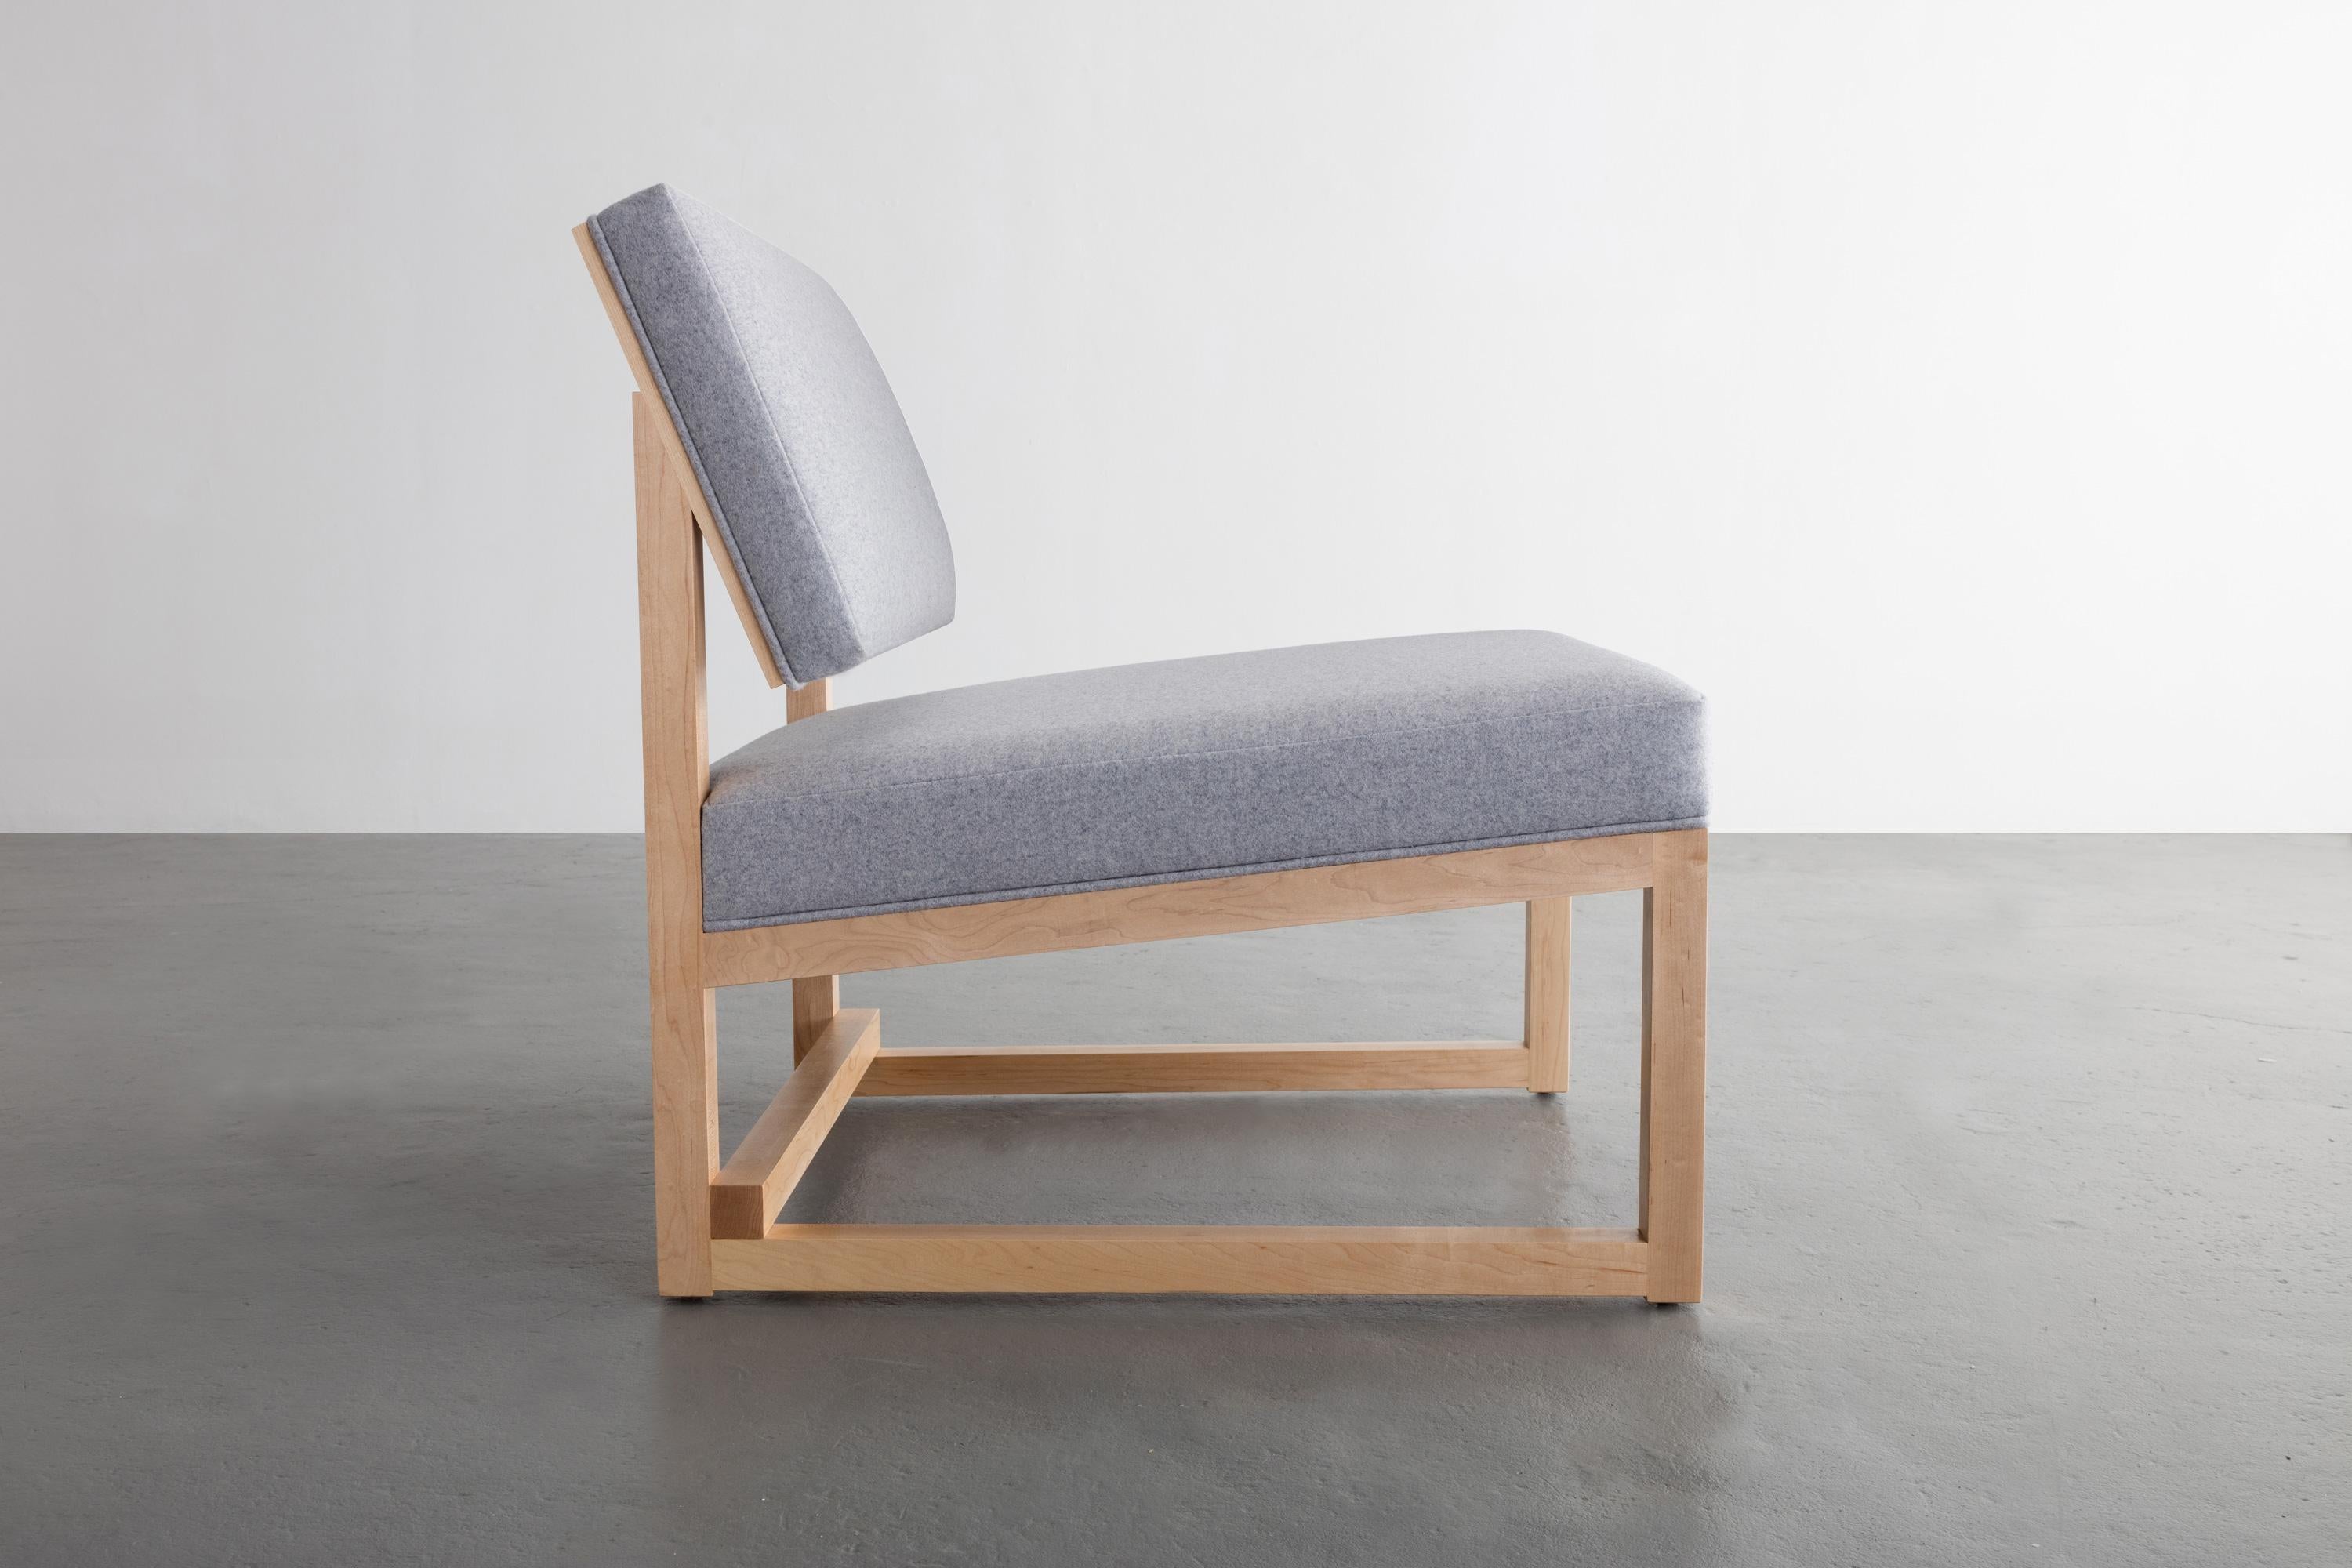 Shown in solid maple and  Divina MD wool felt by Kvadrat. 

Available in solid white oak, maple or walnut
Upholstery in Divina MD wool felt by Kvadrat, or boucle by designtex
Also available in cusomer's own material or leather (COM and COL)

